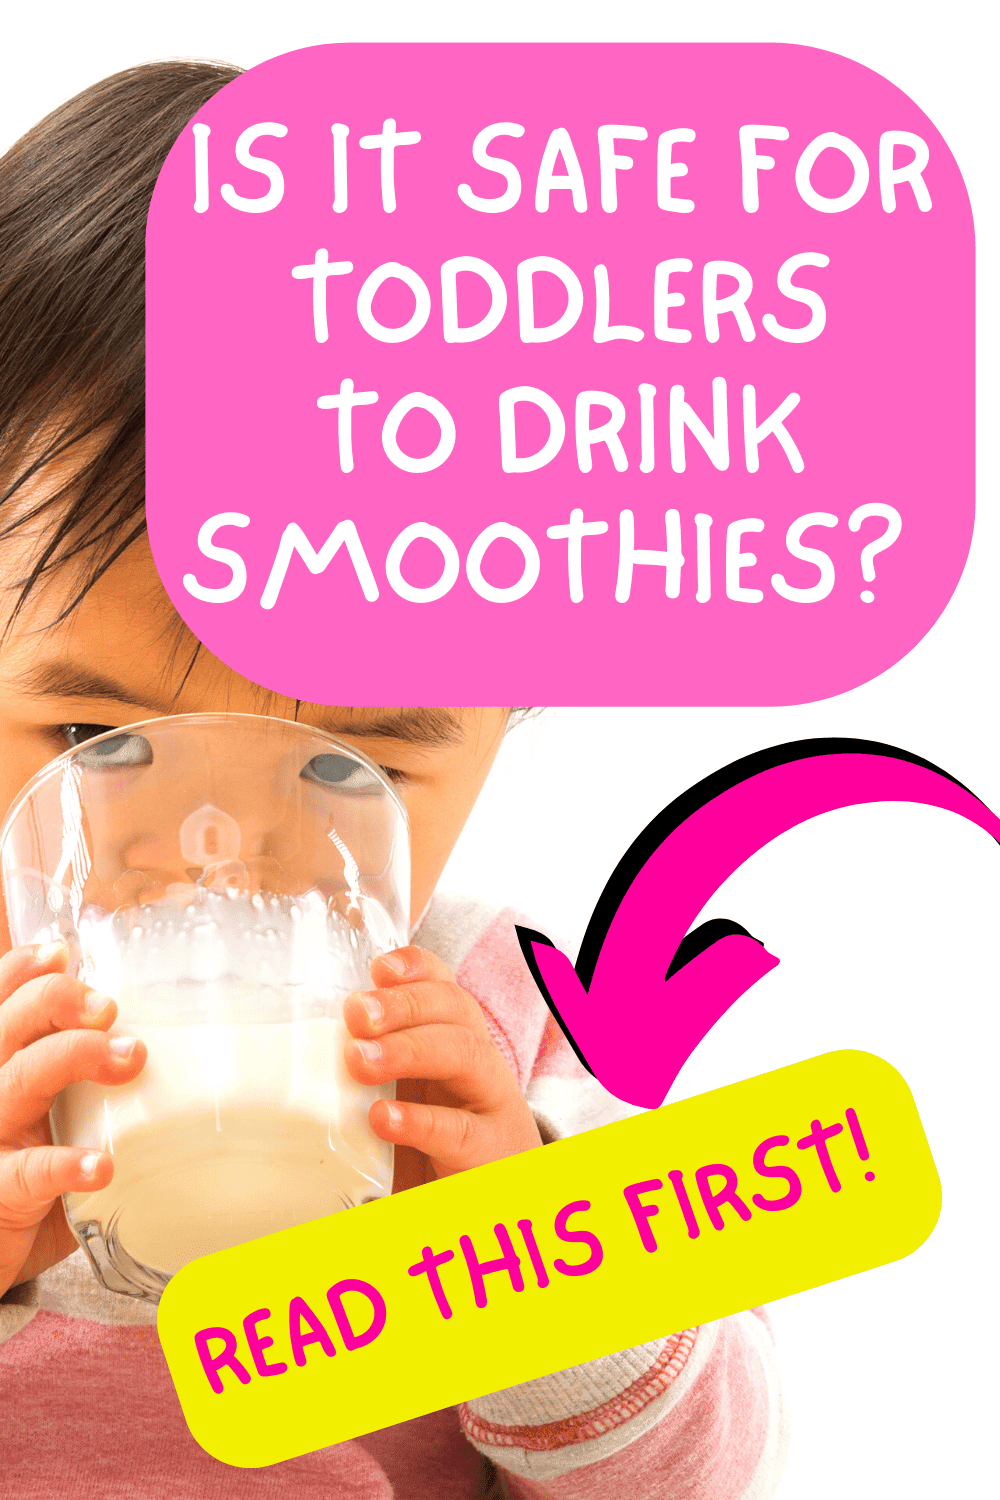 Smoothies for Toddlers: Can Toddlers Drink A Smoothie Safely? text over toddler drinking smoothie